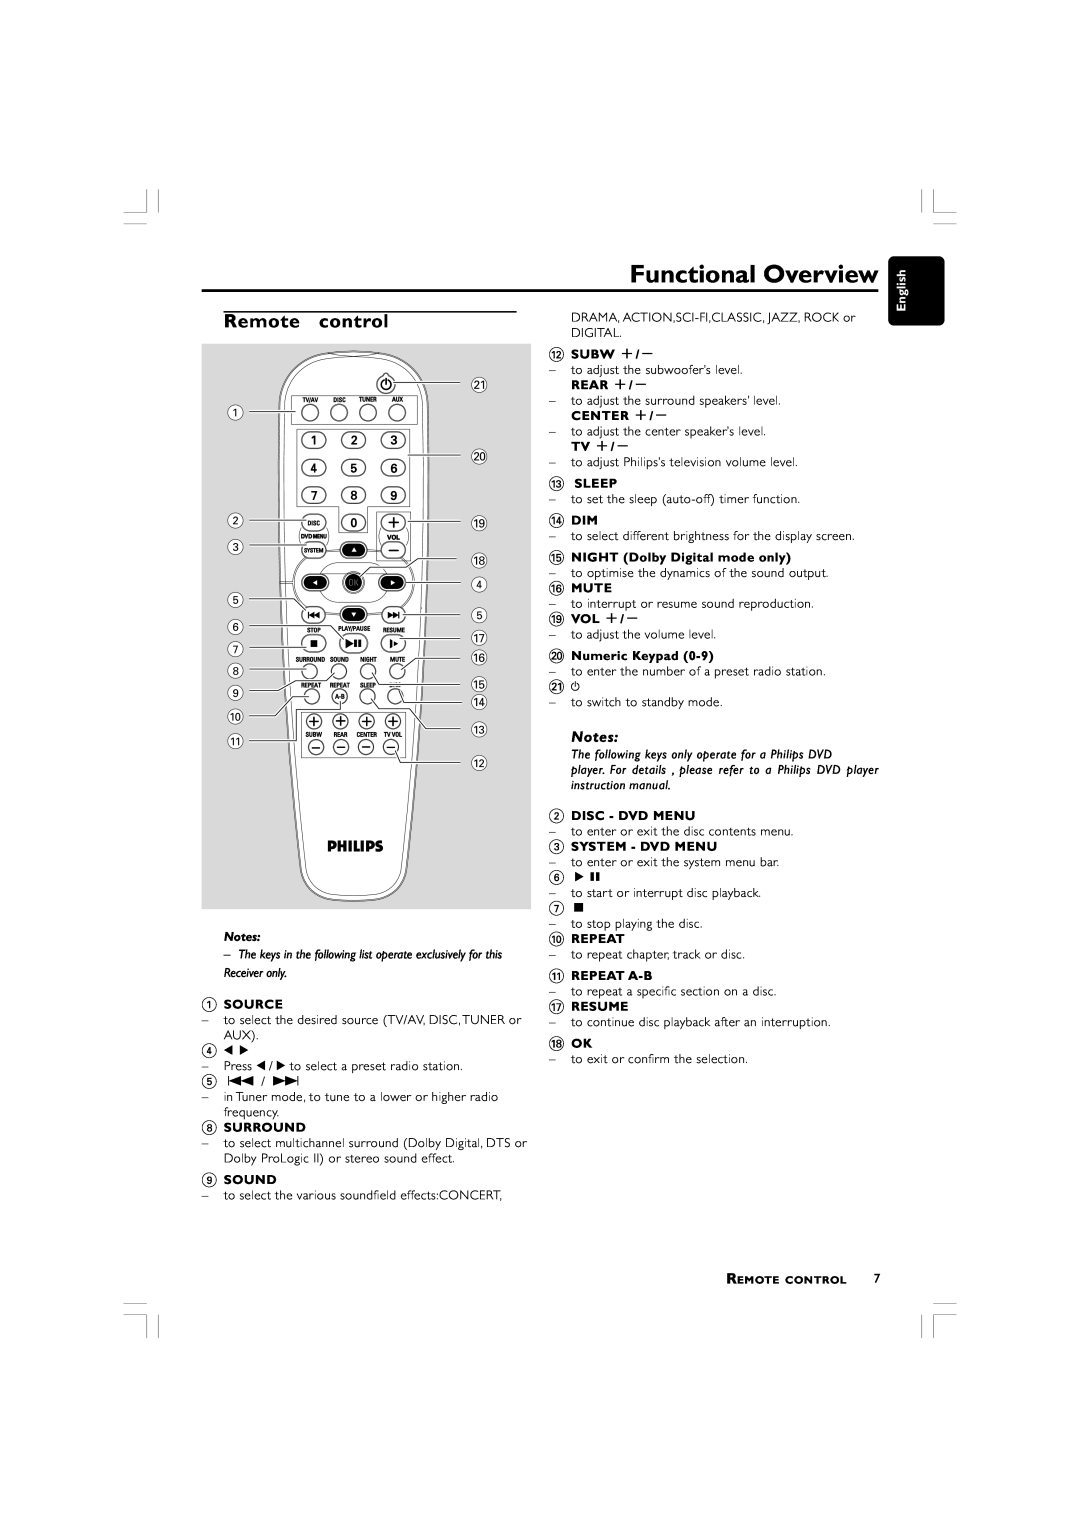 Philips LX700 manual Remote control, Functional Overview 